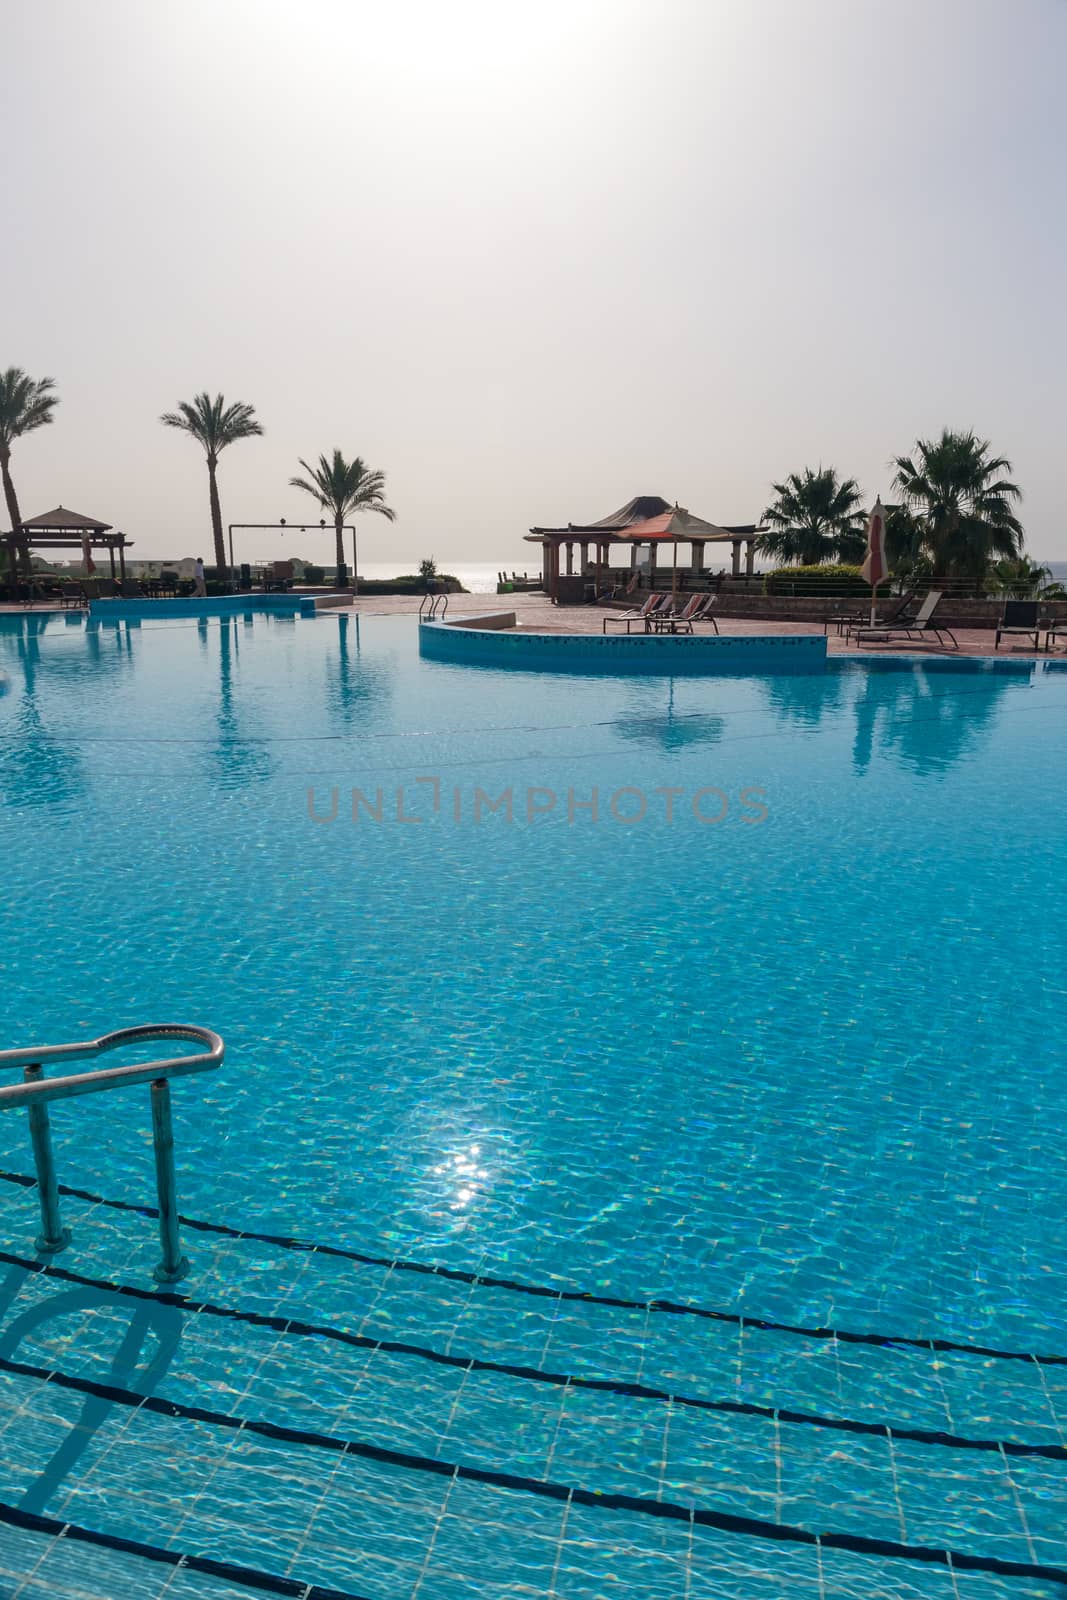 Luxury nice hotel swimming pool in the Egypt. by master1305